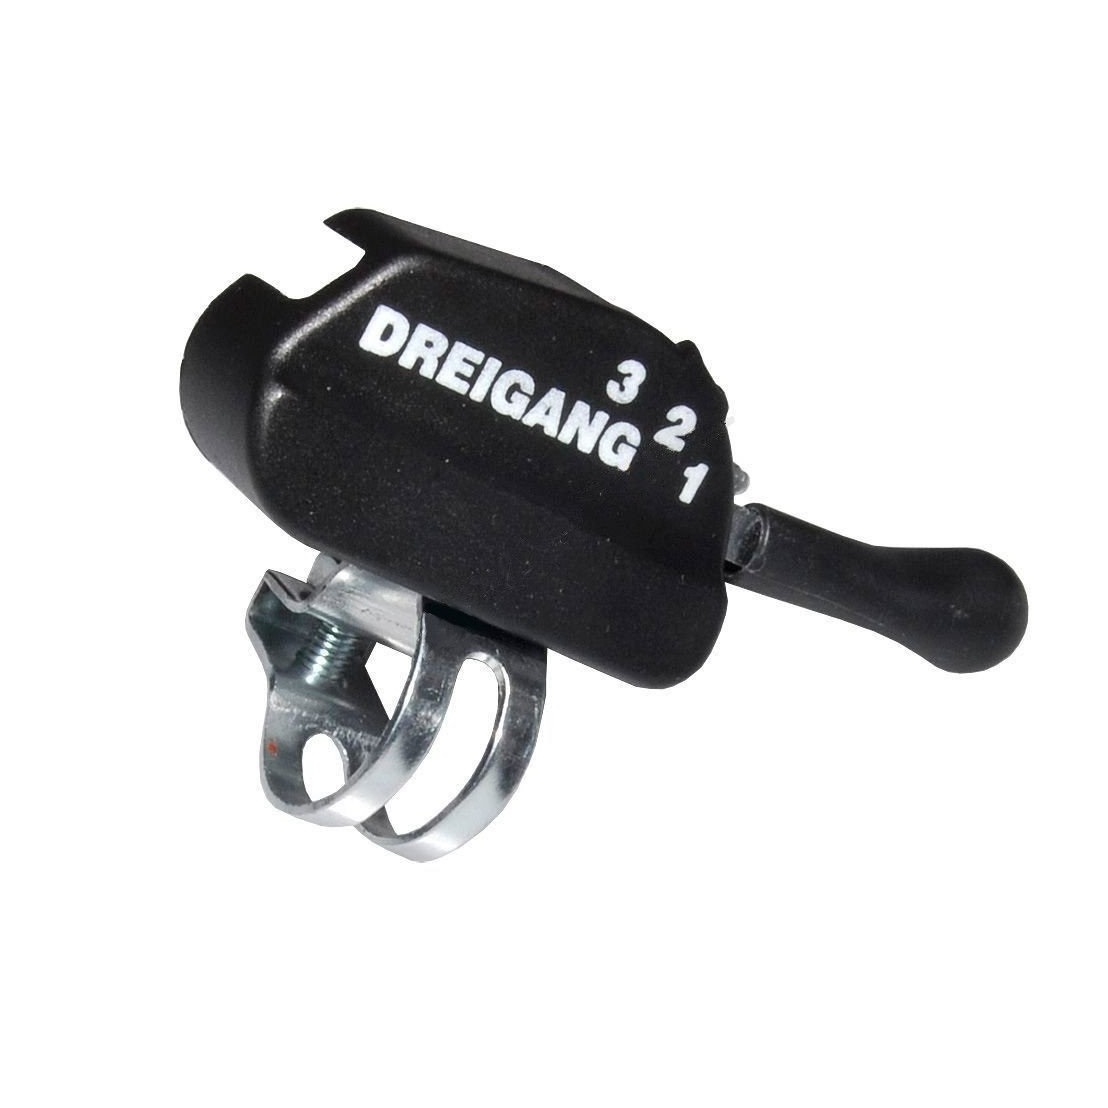 Right 3s trigger shift lever for Sram Spectro T3 and Torpedo hub